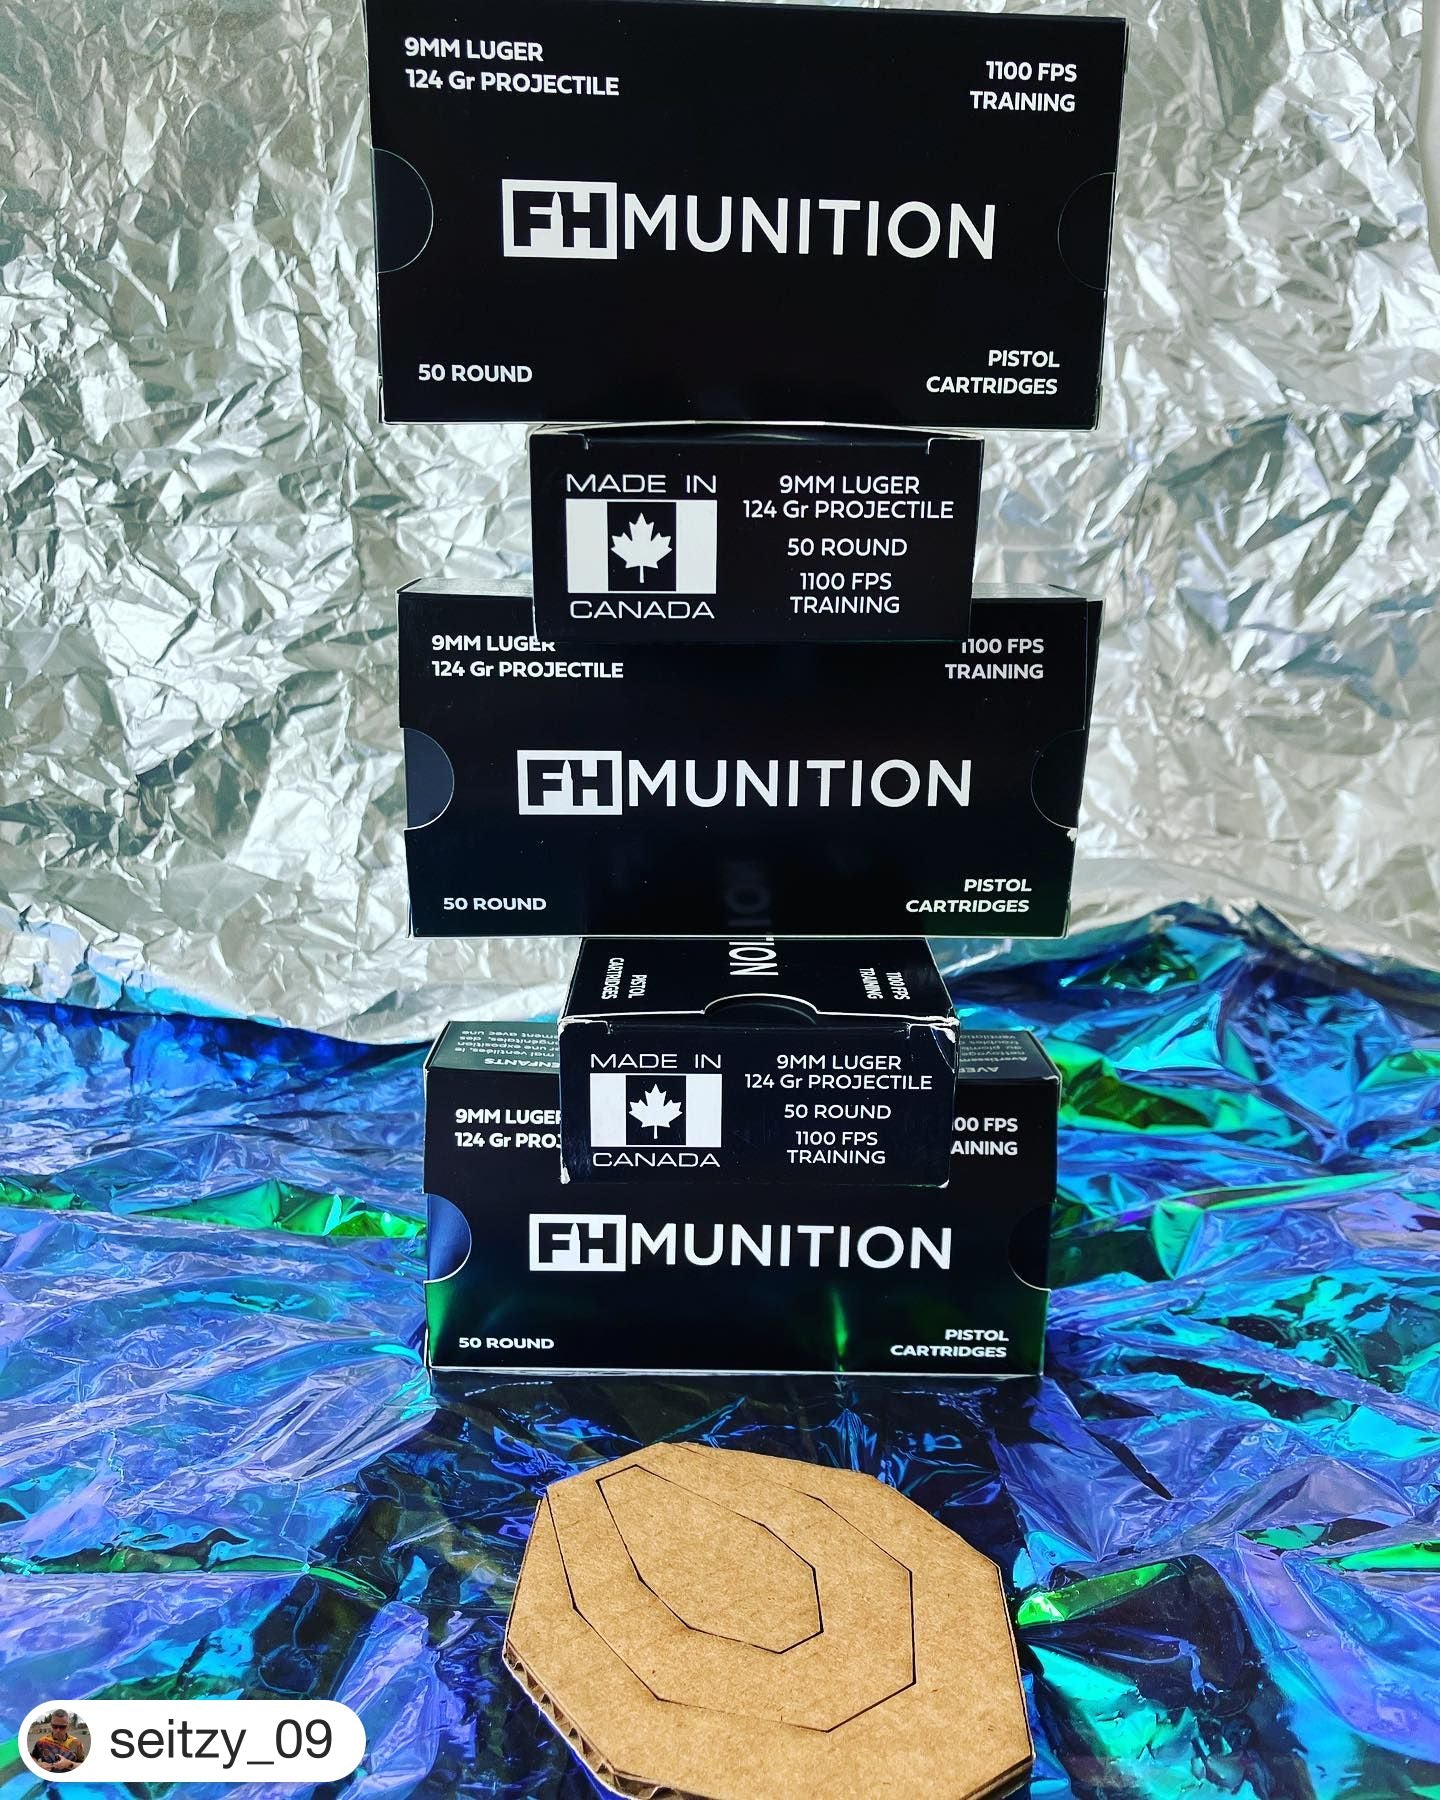 FH Munition will be the Match Ammo for 2023 Canada National Handgun Championship